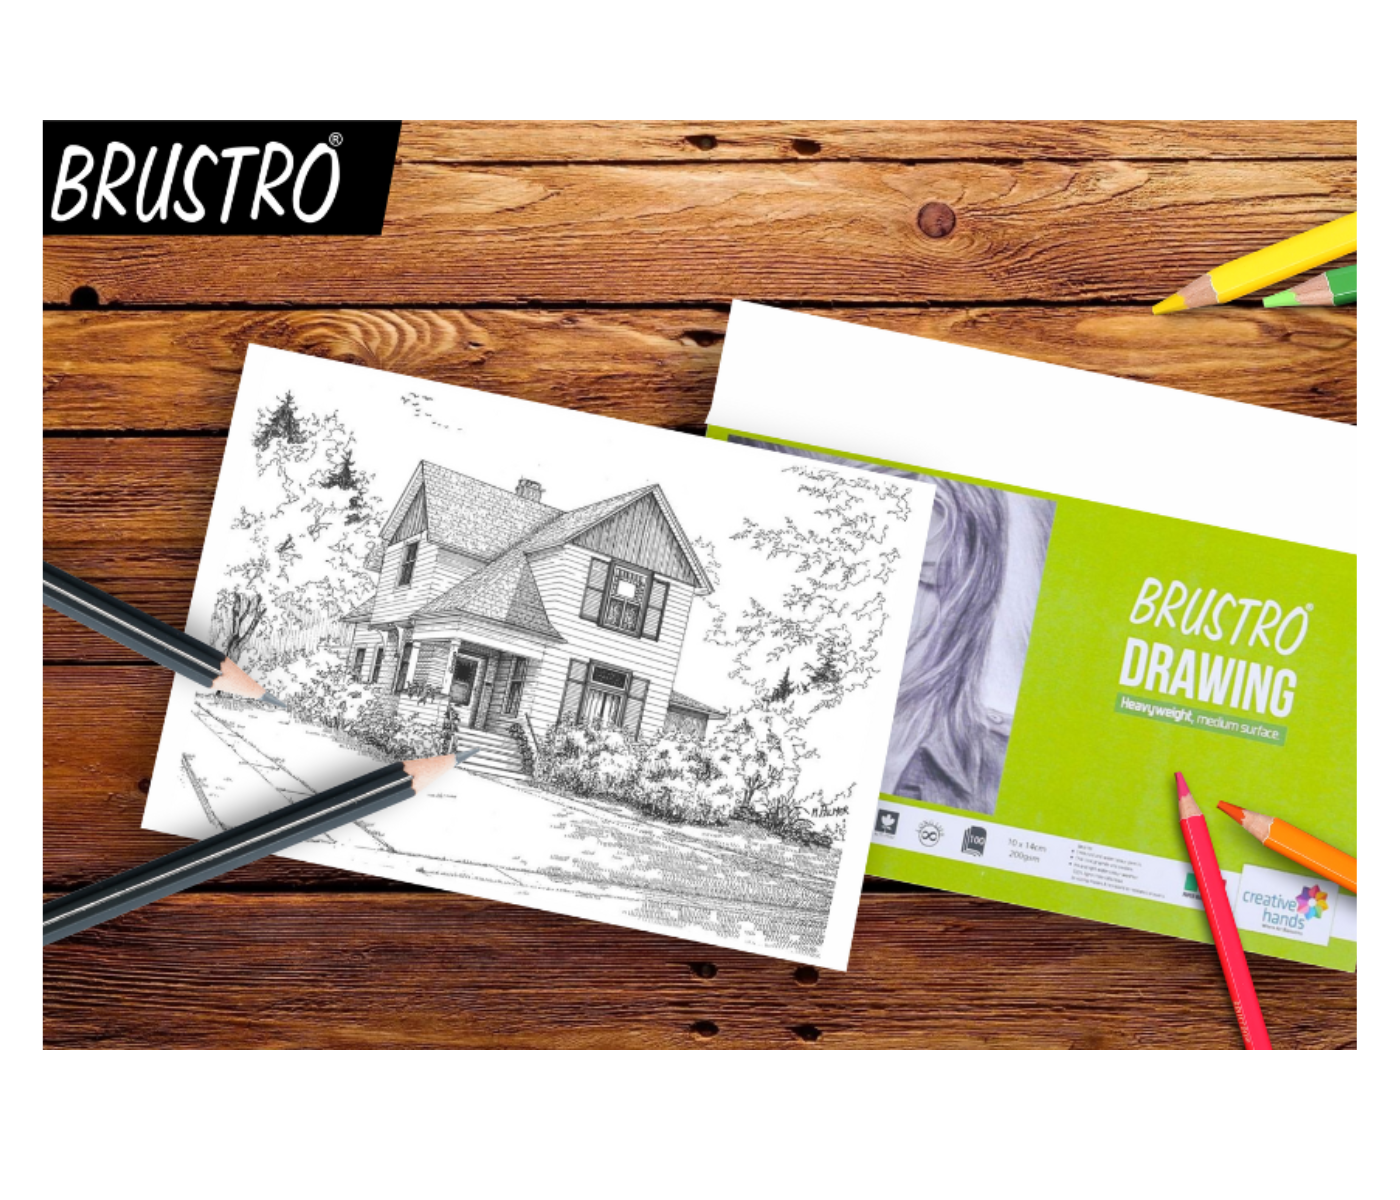 Brustro Sketching & Drawing Papers 200 GSM A5 , 32 + 8 Free Sheets (Pack of 2)